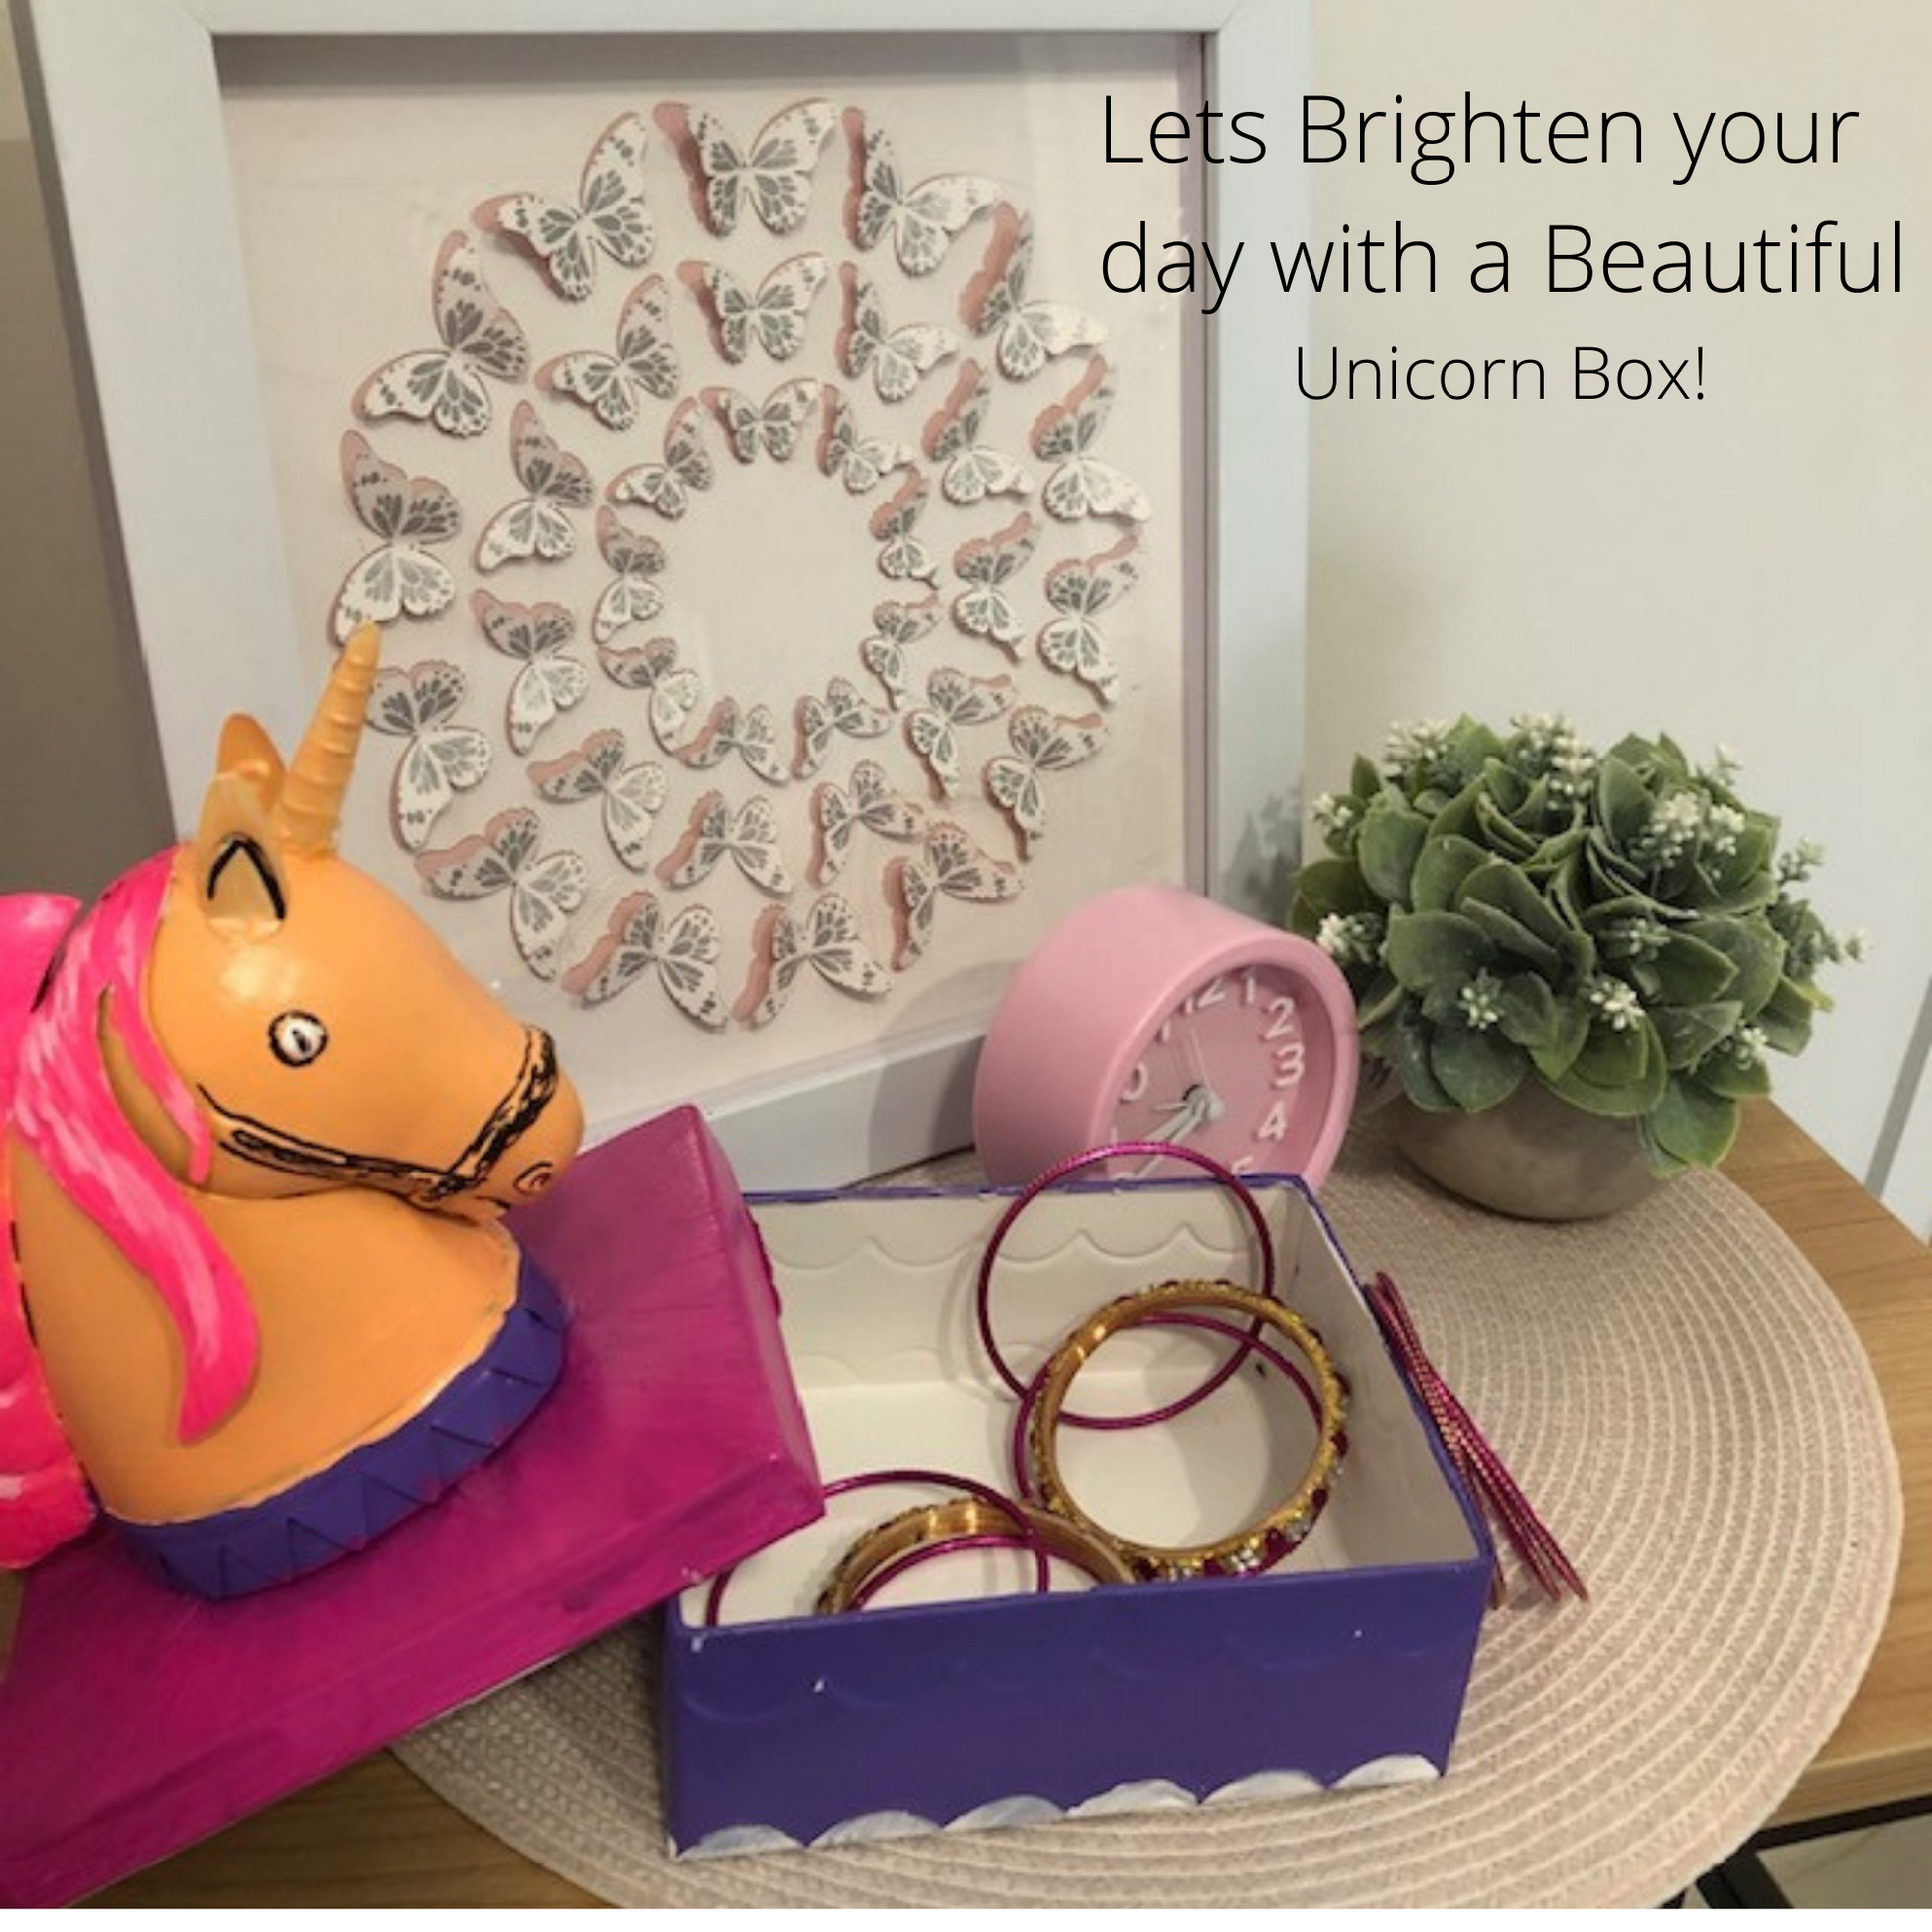 Self-Made Magic – Let your personality and artistry shine with CR8 Outlet’s unicorn girl jewelry box painting set! Your complete kit lets you decorate a cute, capable box however you desire!